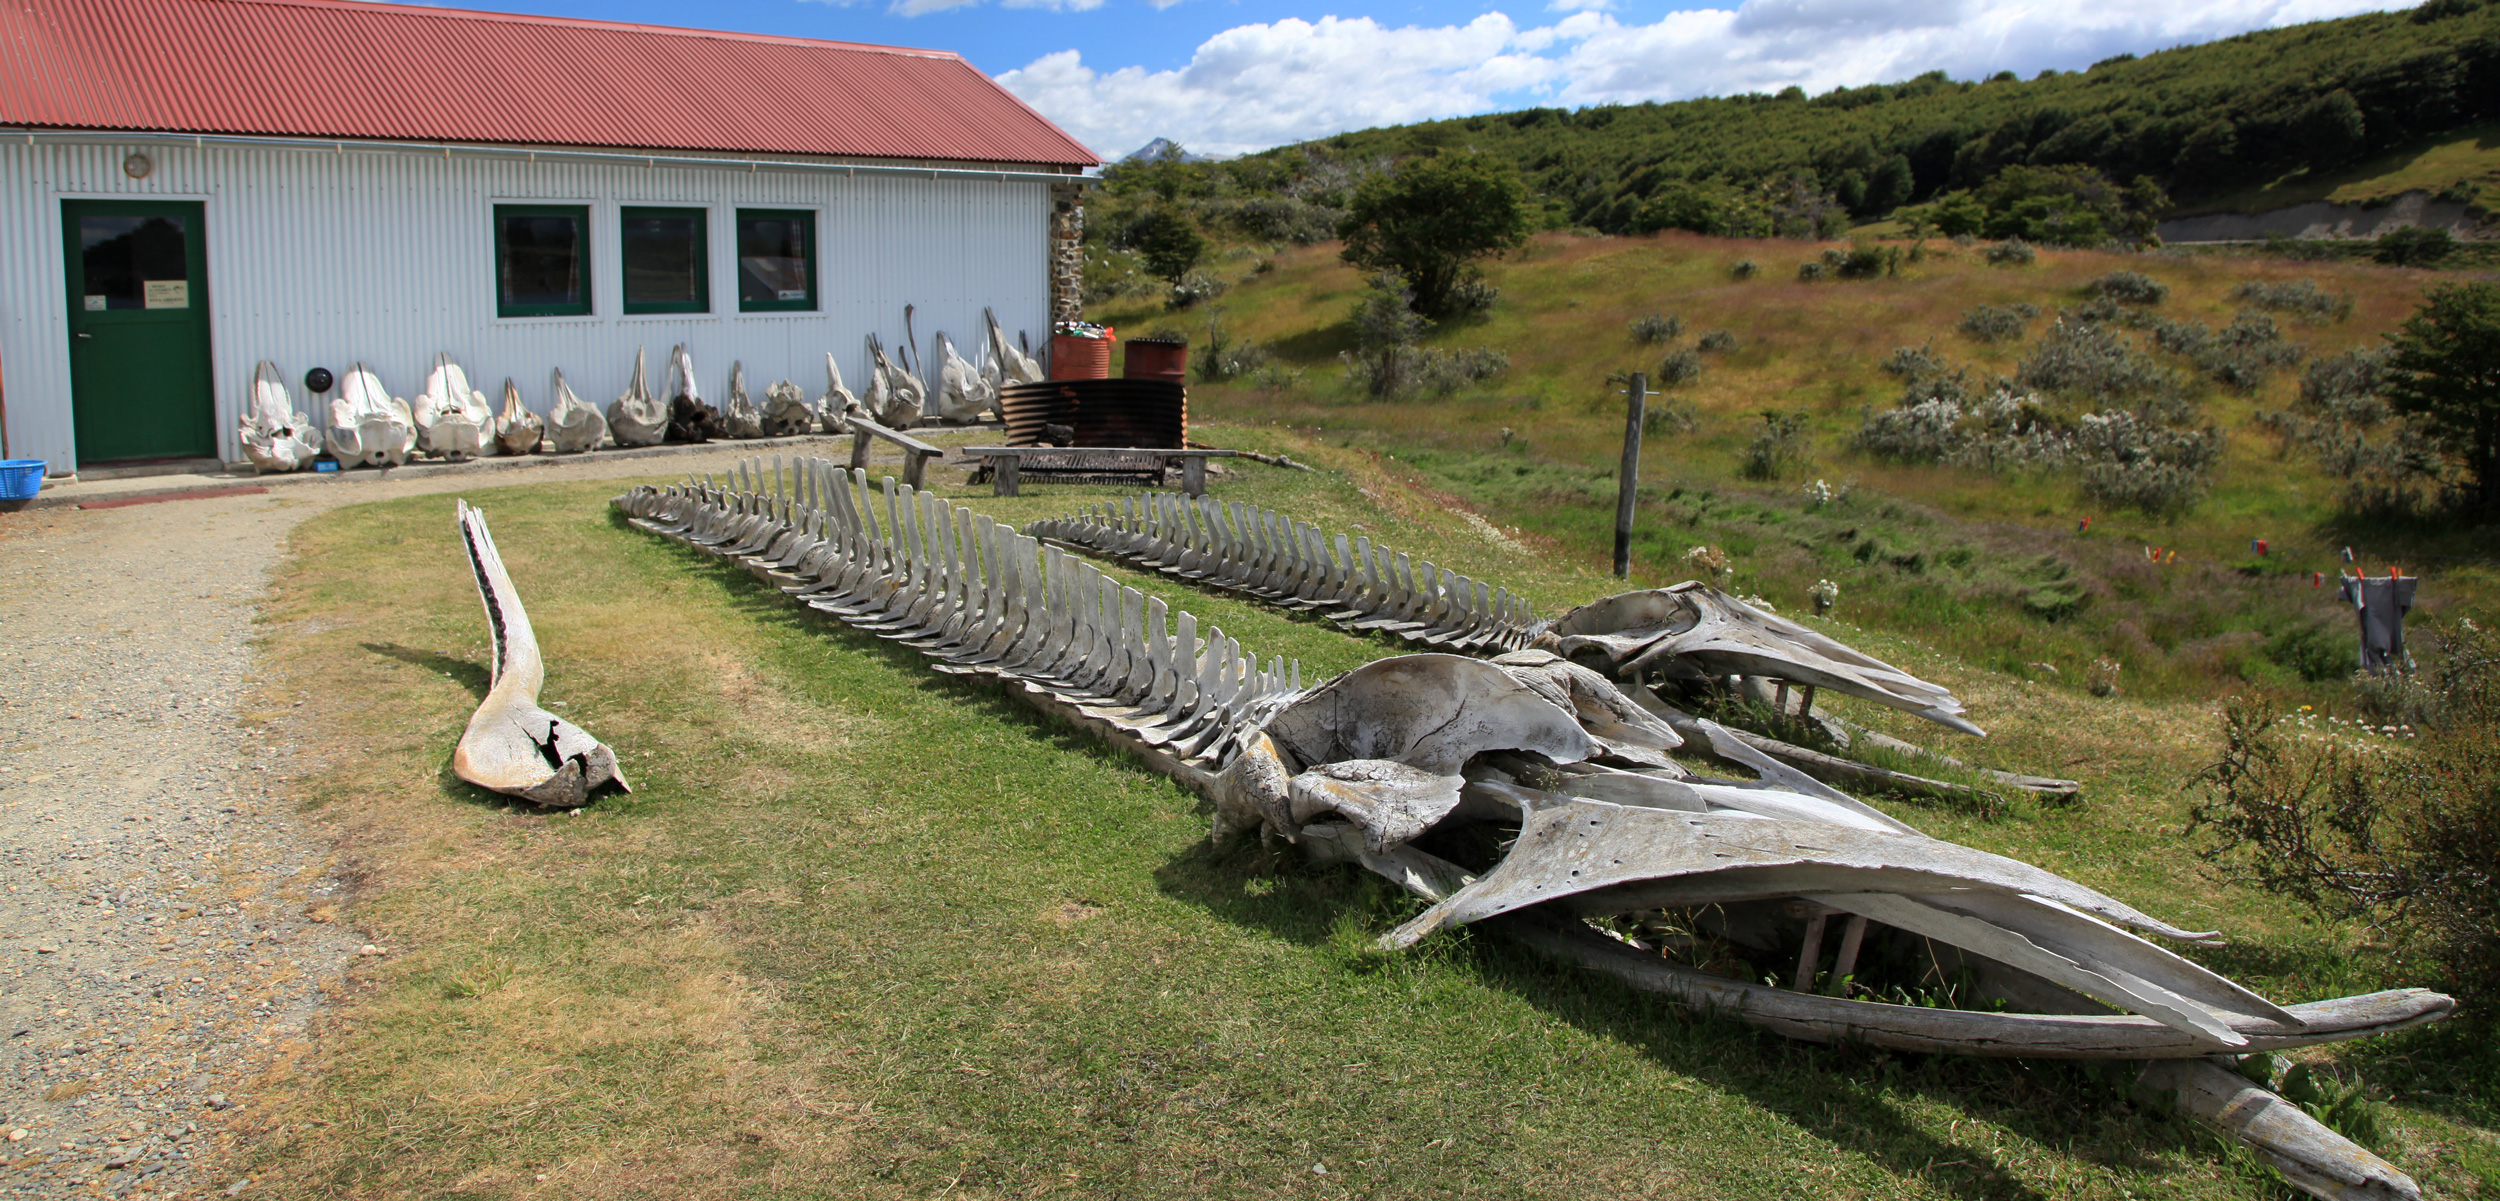 Skeletons of marine mammals fill the property at Estancia Harberton, a ranch at the tip of Tierra del Fuego, Argentina, where Natalie Goodall amassed one of the world’s most significant collections of marine mammal bones. Photo by Liam Quinn